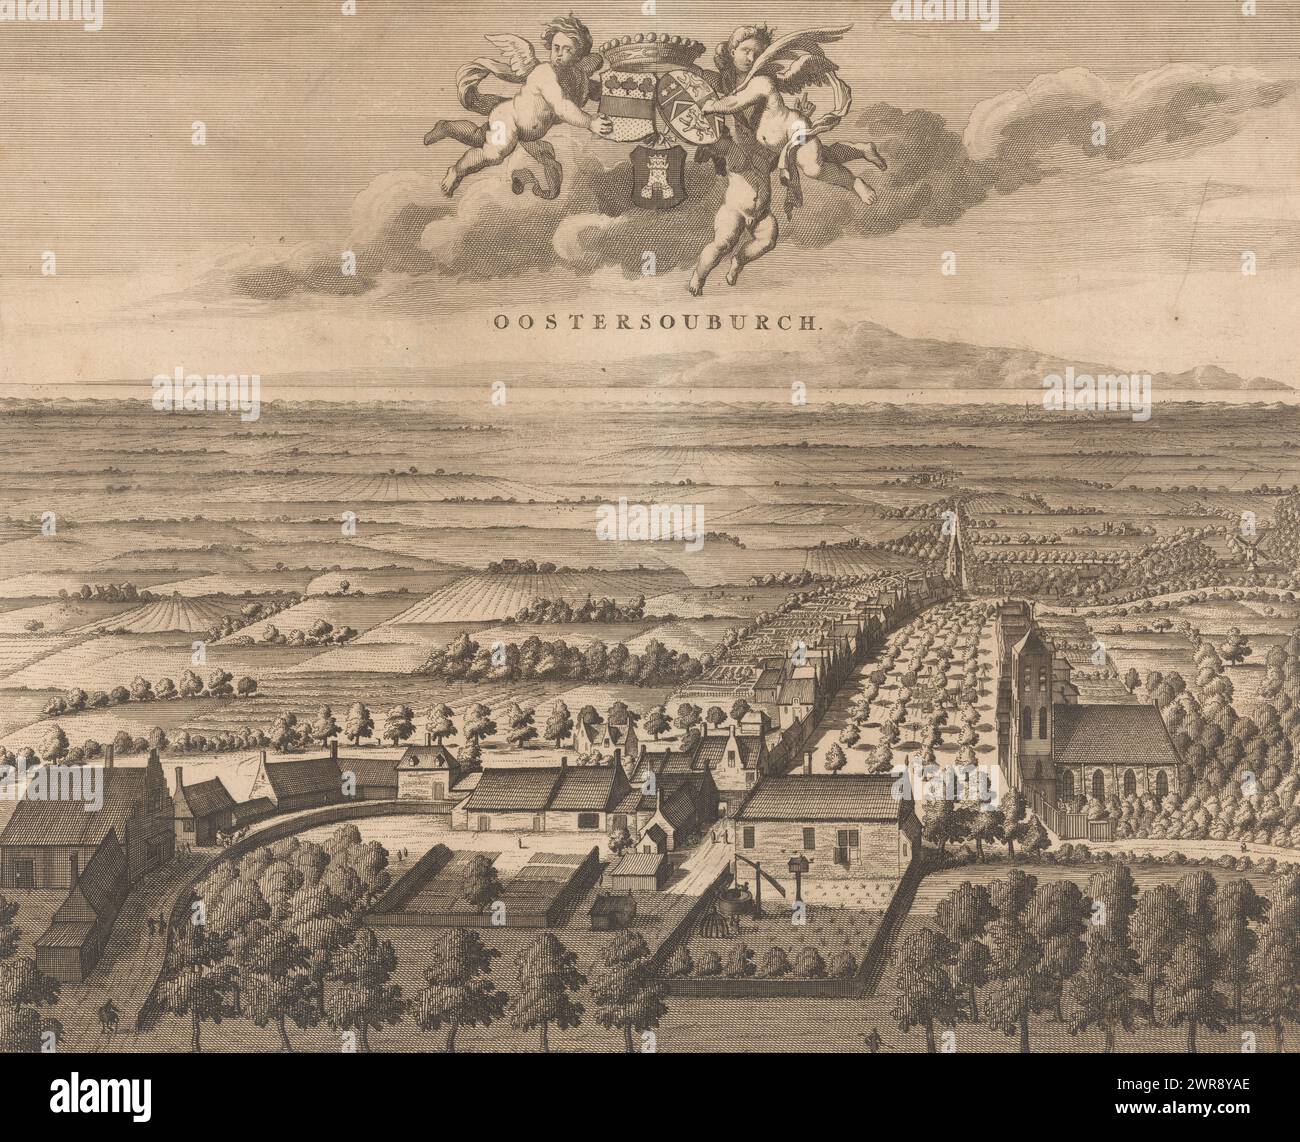 View of Oost-Souburg, Oostersouburch (title on object), View of the village of Oost-Souburg in Zeeland, from a bird's-eye perspective. At the top center three putti with three weapons; on the left that of Alexander de Muinck, lord of Oost-Souburg, on the right that of his wife Maria Thibaut, and below that of Oost-Souburg., print maker: anonymous, publisher: Johannes Meertens, (possibly), publisher: Abraham van Someren, (possibly), publisher: Middelburg, publisher: Amsterdam, publisher: Leiden, 1696 - 1728, paper, etching, engraving, height 270 mm × width 333 mm Stock Photo